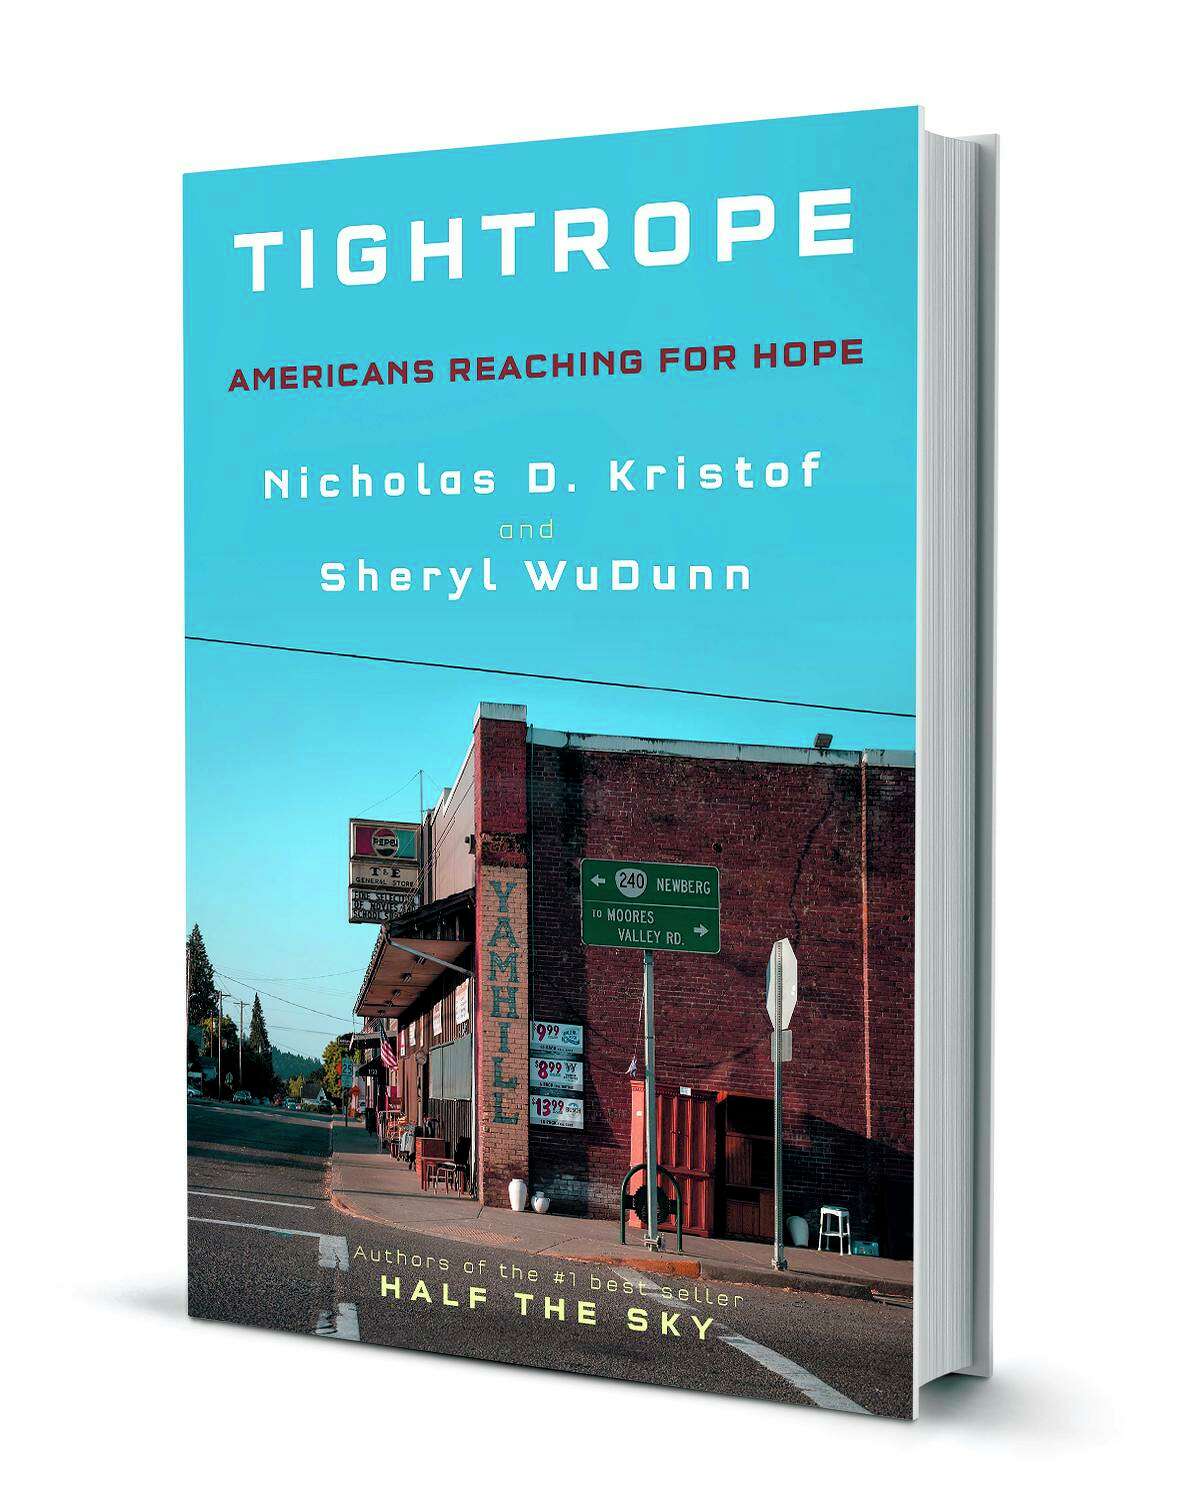 In “Tightrope: Americans Reaching for Hope,” Nicholas Kristof and Sheryl WuDunn, The Pulitzer Prize-winning husband-wife team, dives into struggling small towns in America, revealing systems and programs that have failed.